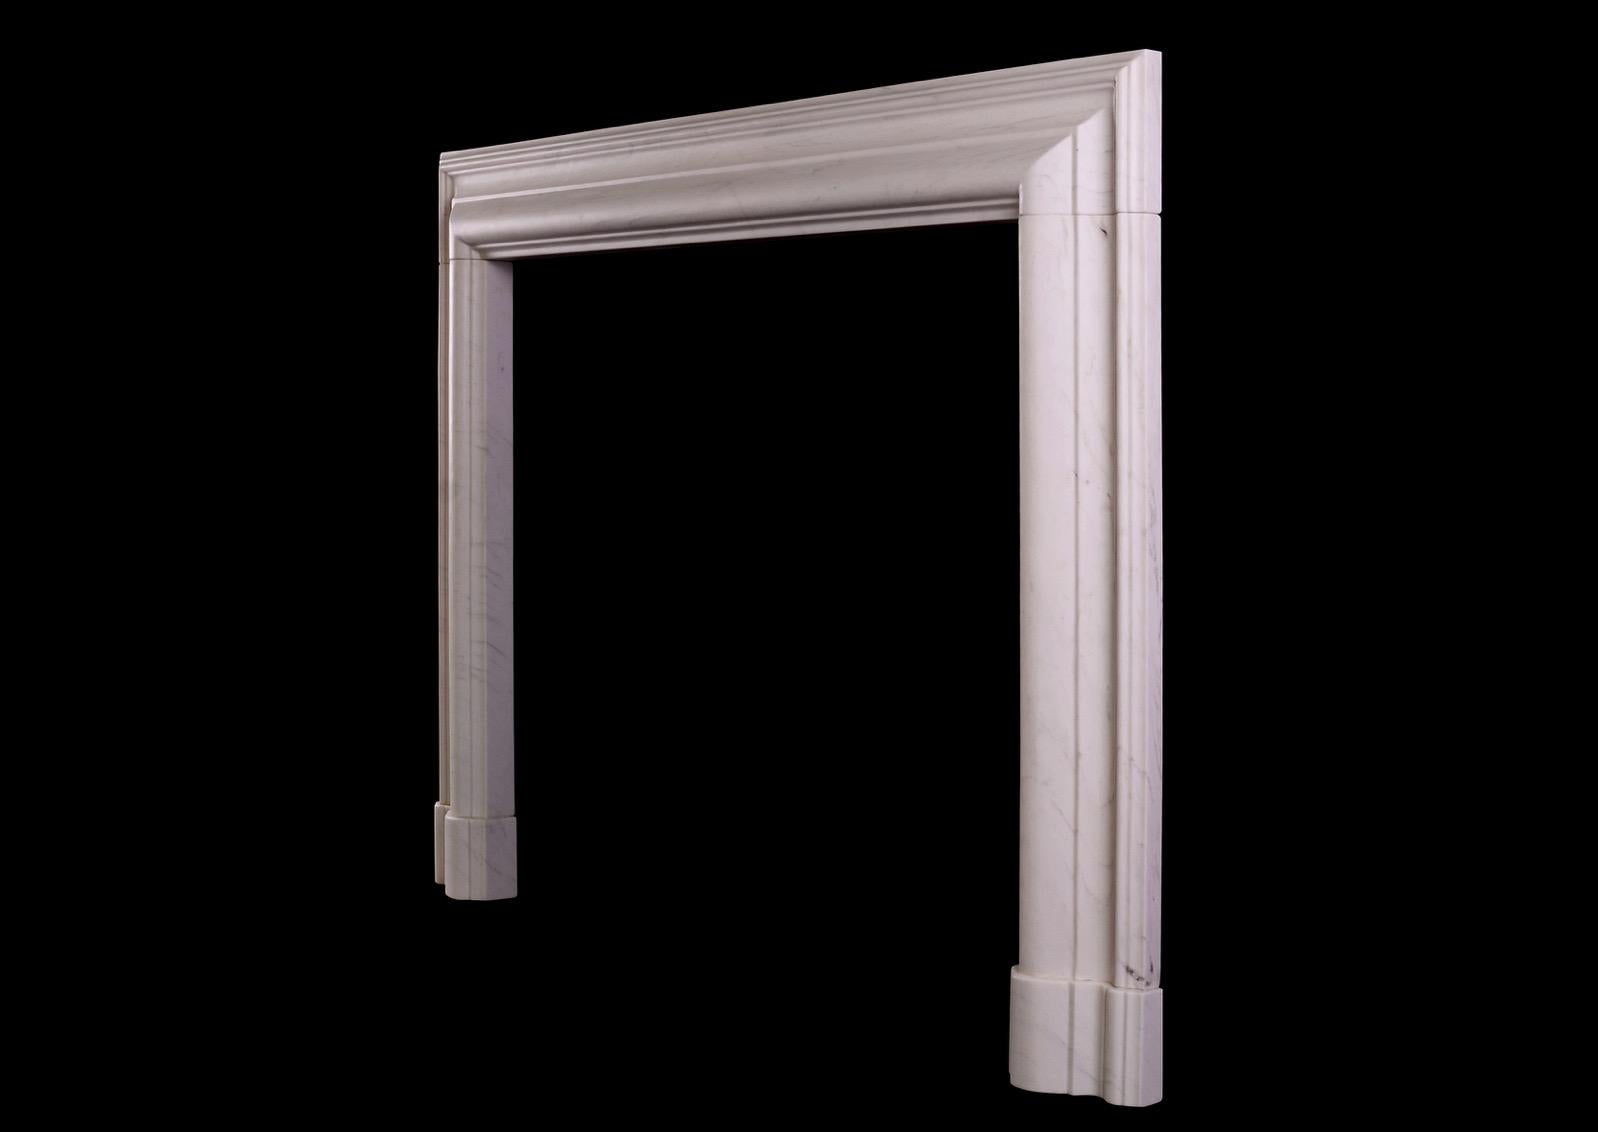 An English moulded bolection fireplace in white marble. An elegant shape, based on a period original. Modern.N.B. May be subject to an extended lead time, please enquire for more information.

Measures: Shelf width: 1432 mm 56 